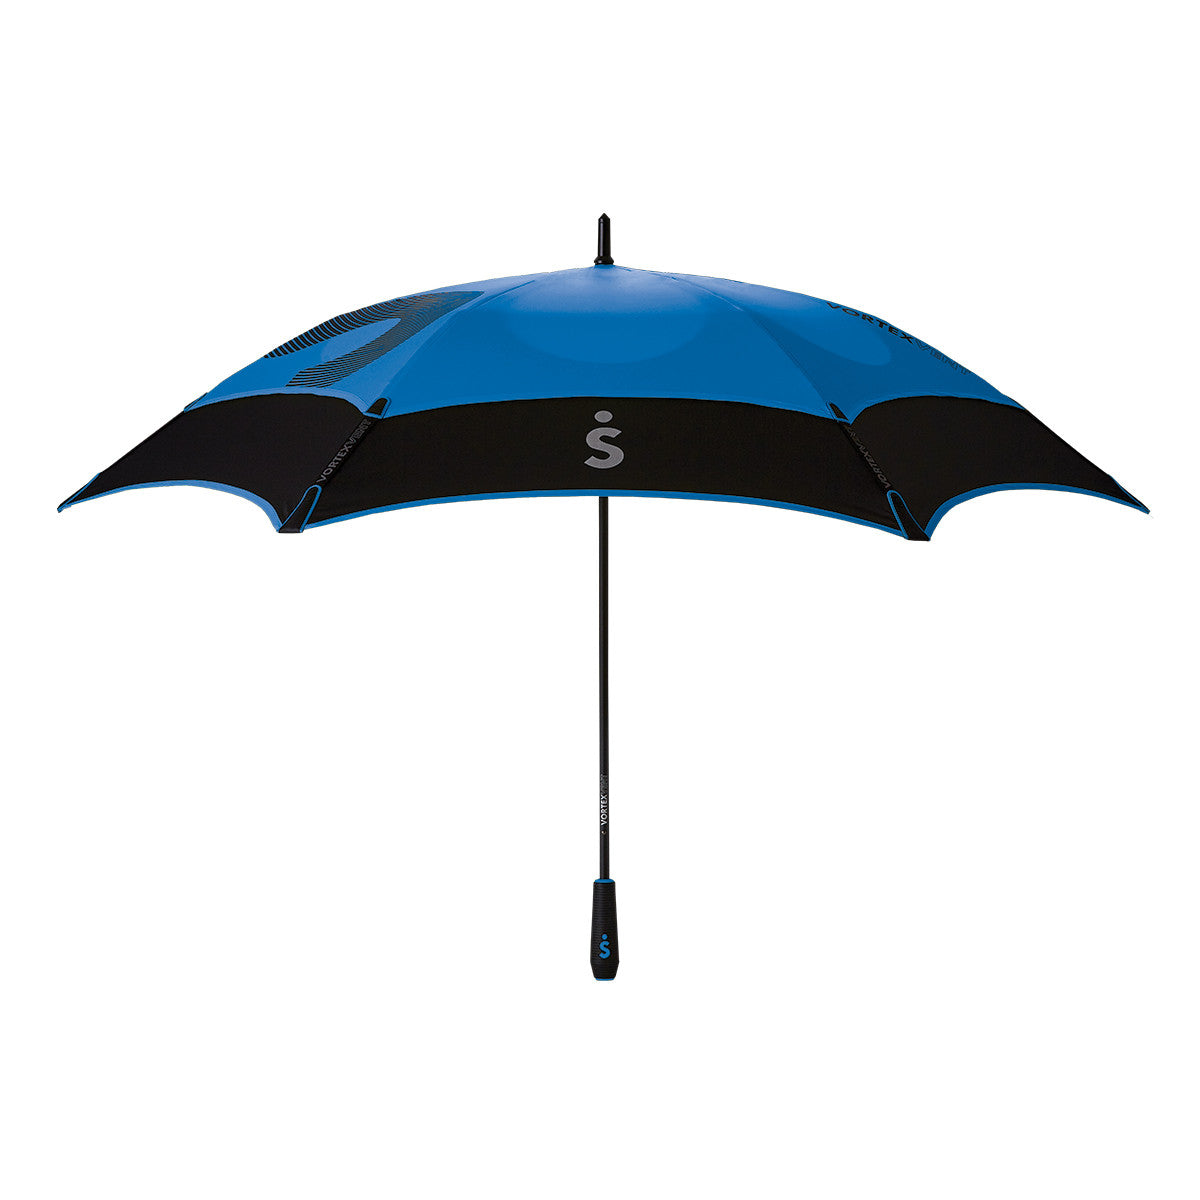 bright blue and black vented double canopy wind-resistant three person Vortex Vent golf umbrella with fiberglass frame and rubber grip, viewed straight on